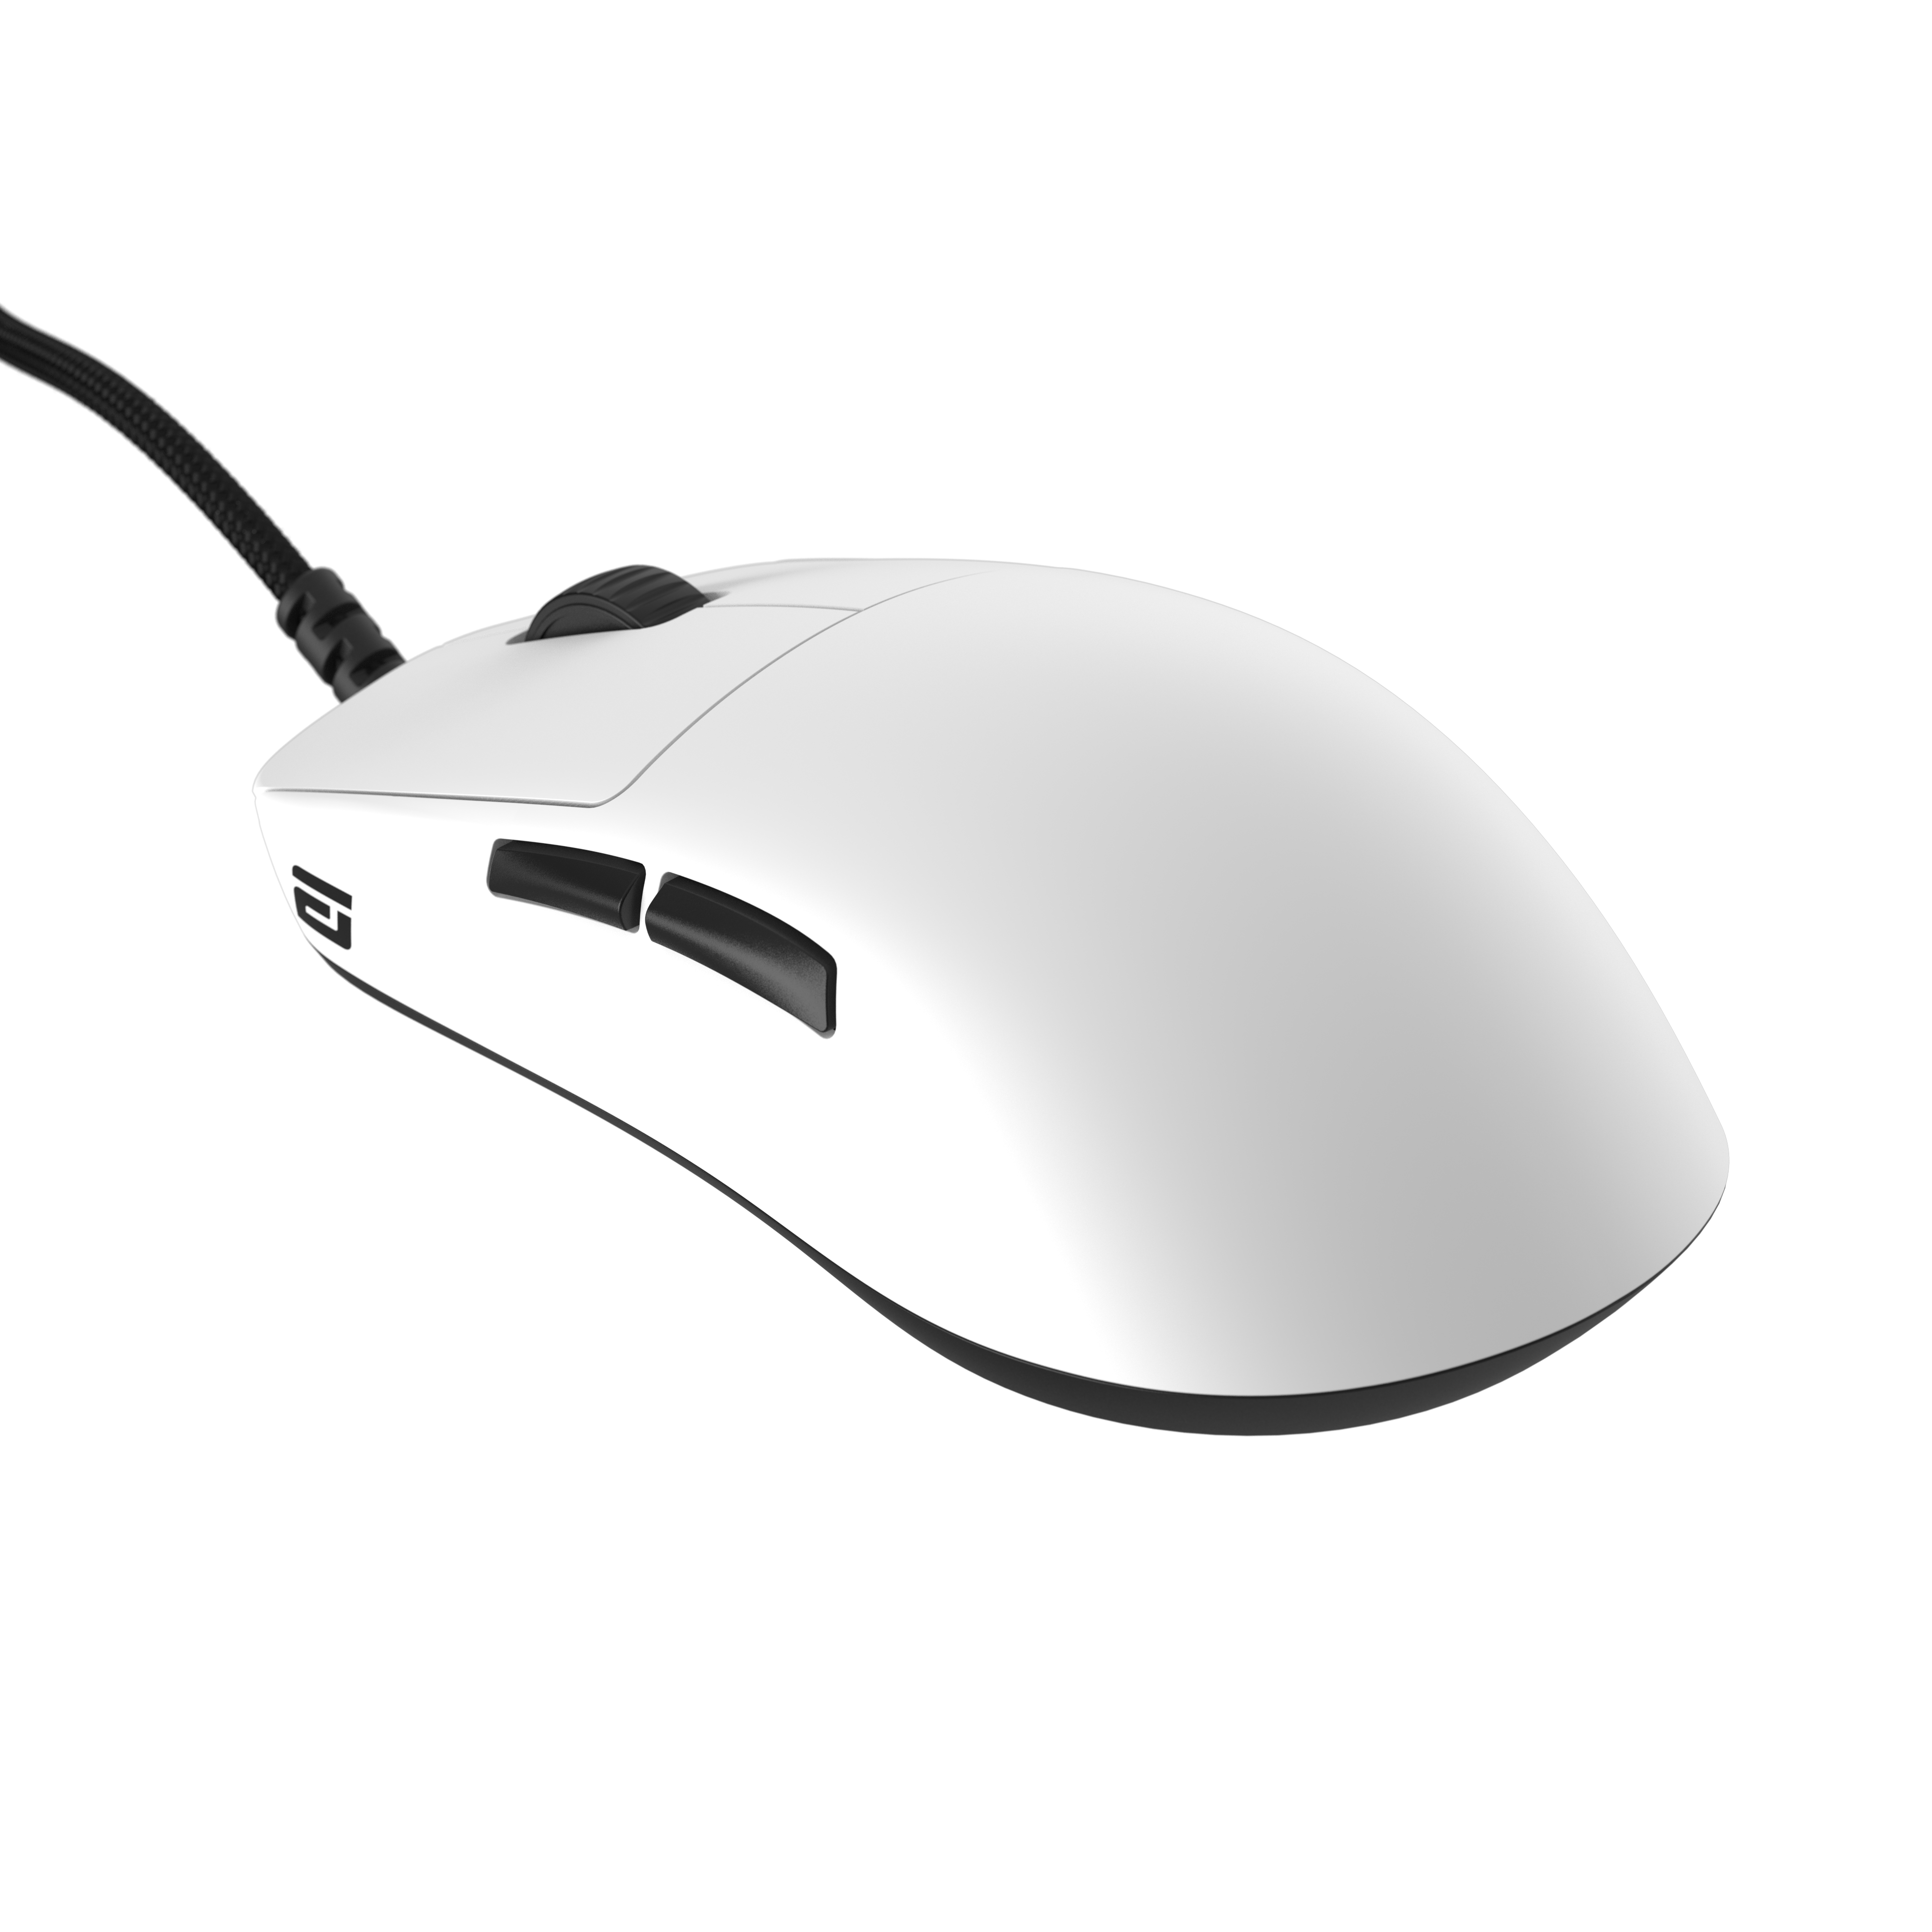 OP1 8k Gaming Mouse - White